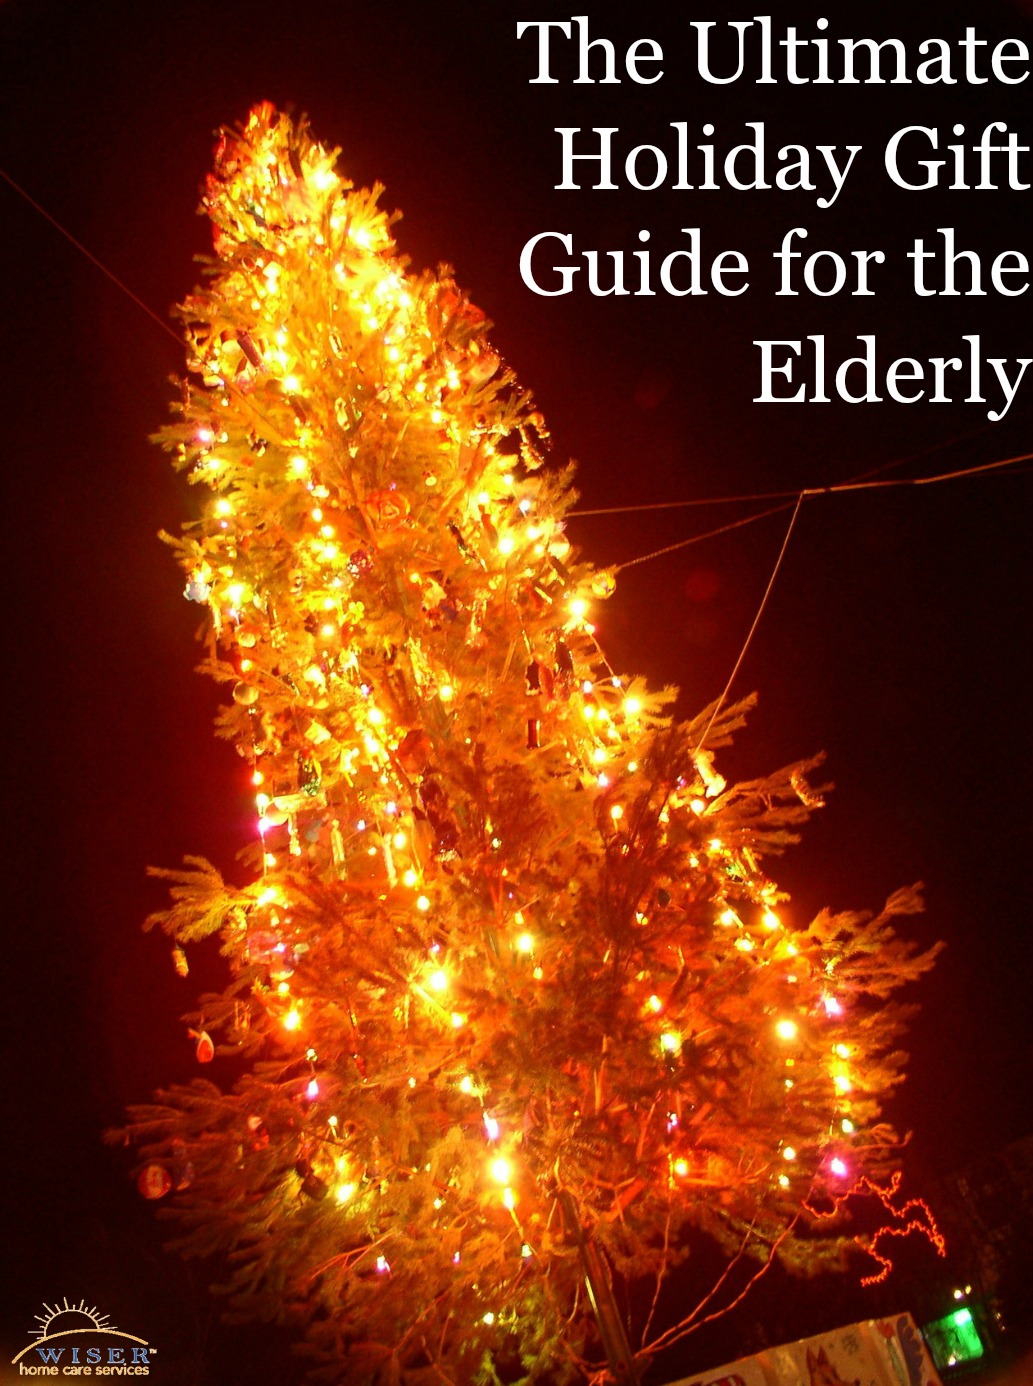 Christmas is just around the corner. If you're struggling to find the perfect gift for an elderly loved one in your life our ultimate gift guide will help.